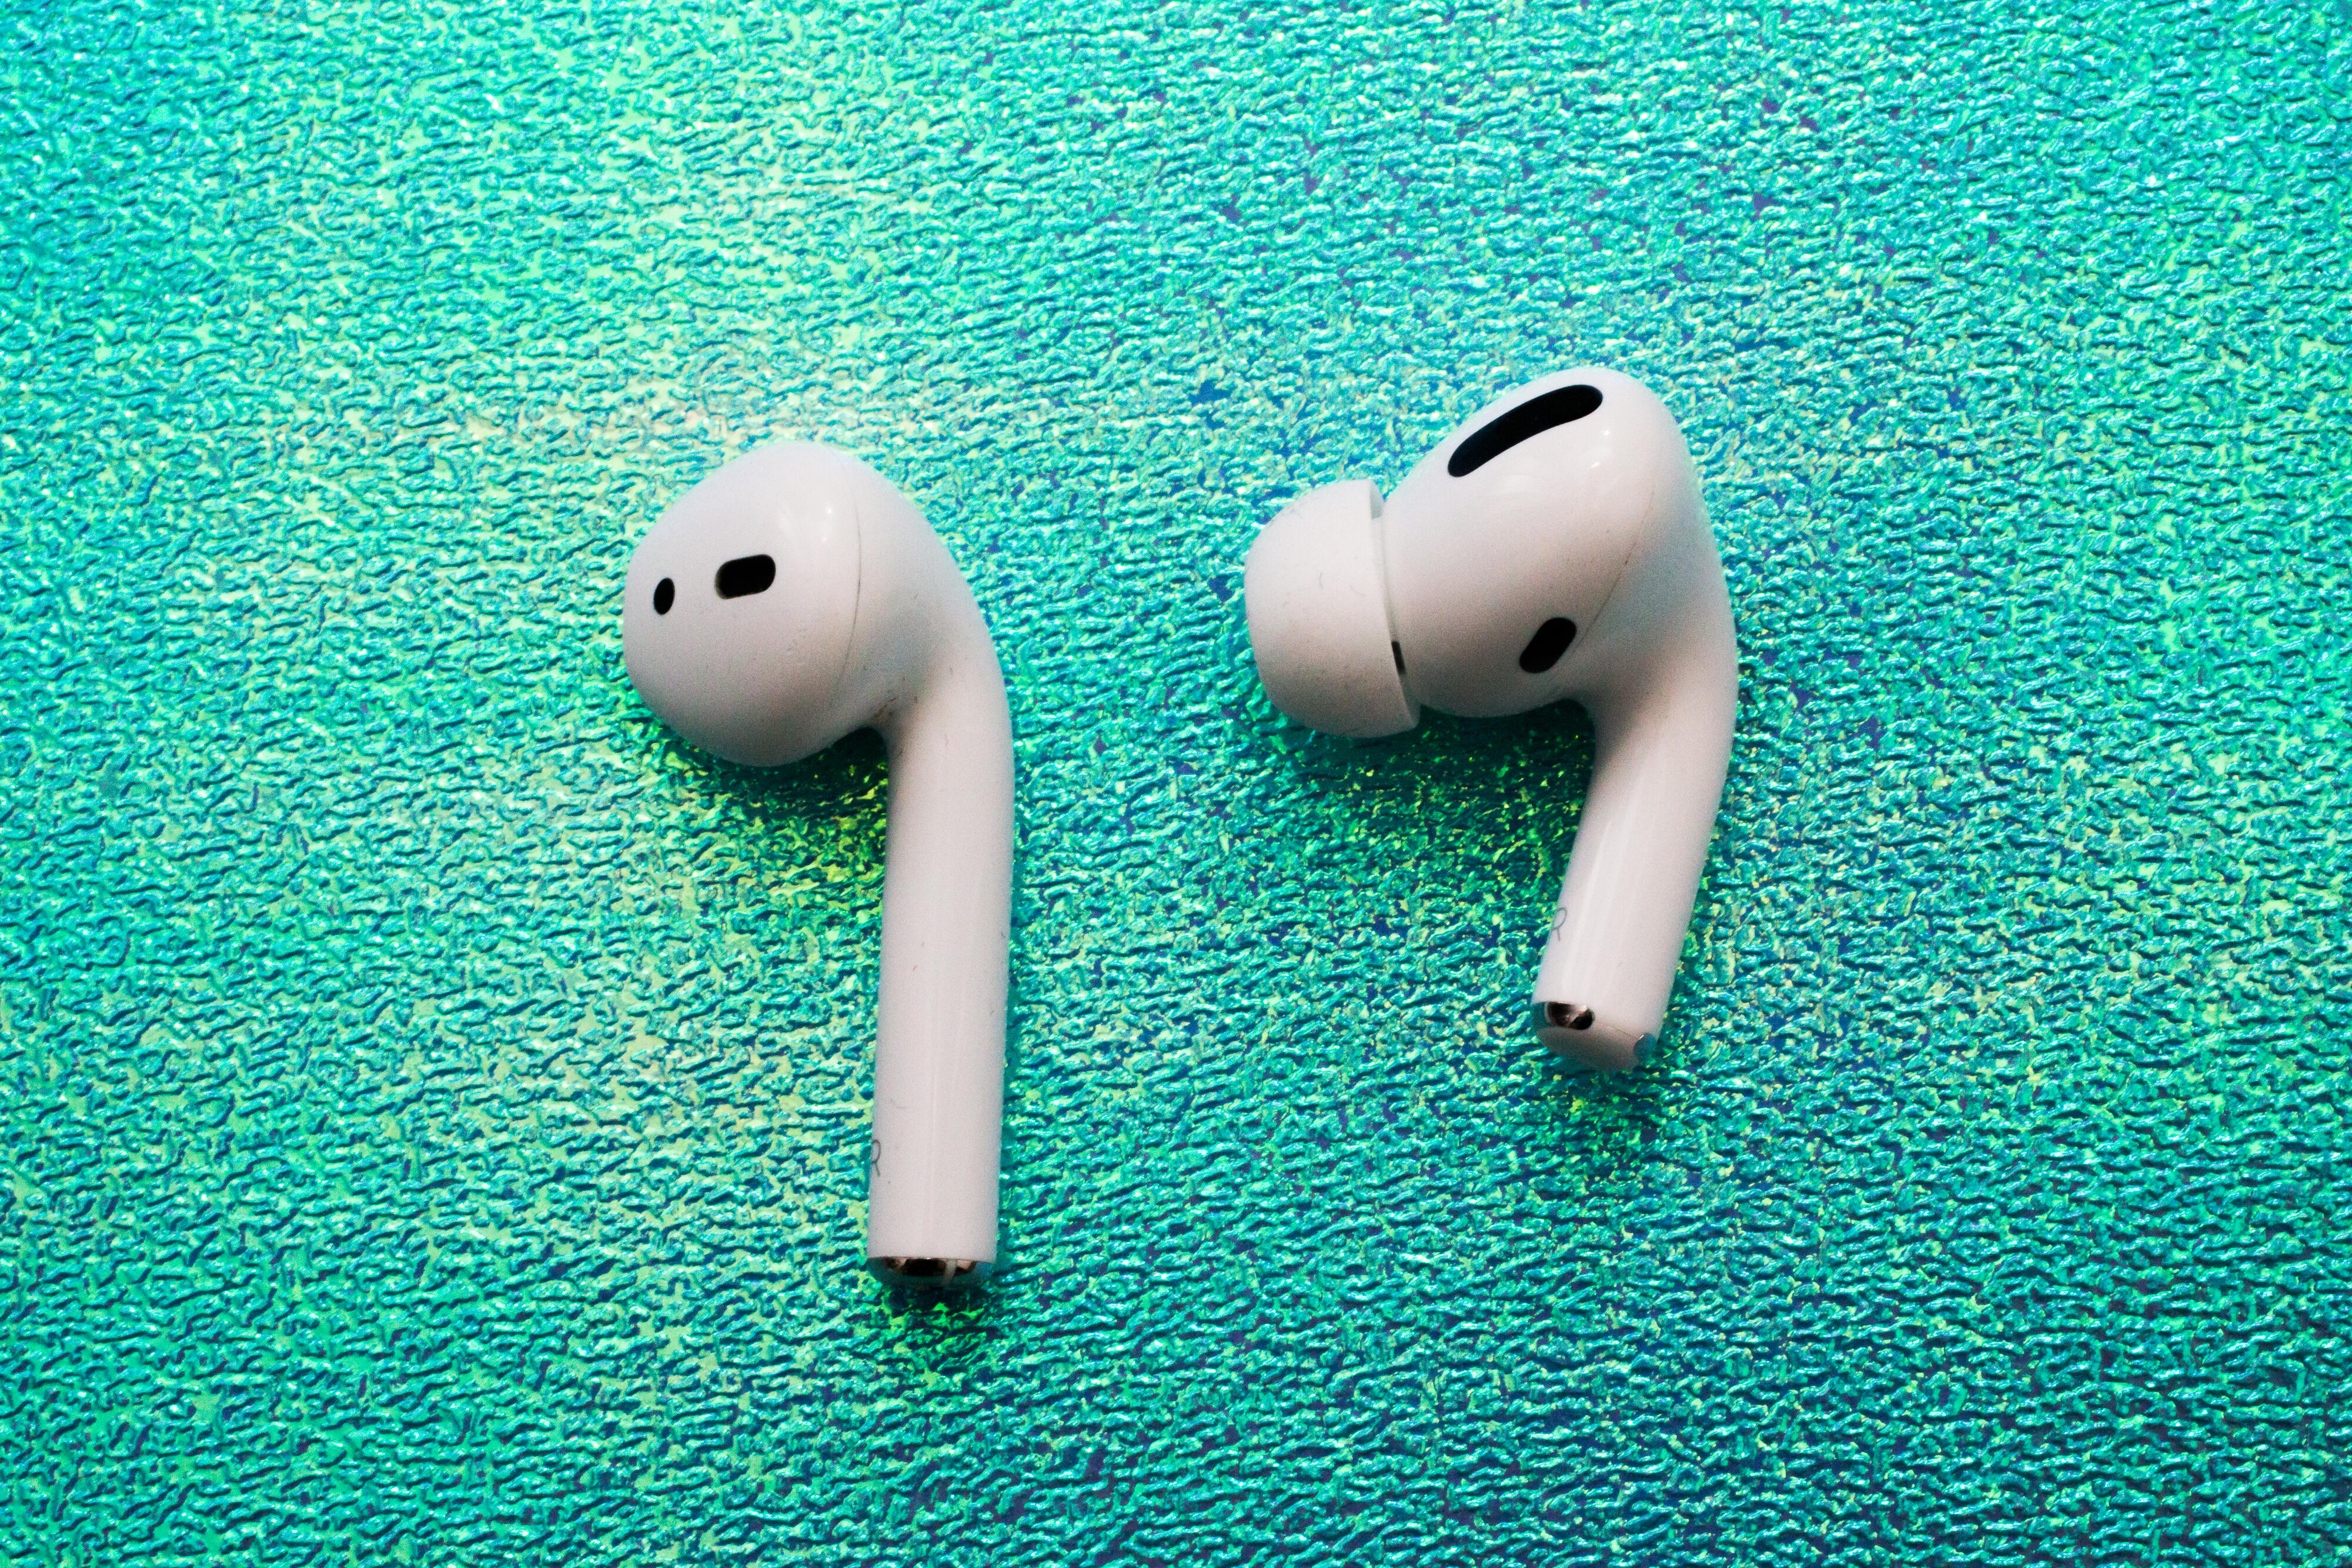 Airpods 3 1. Аирпод 3. Apple AIRPODS. AIRPODS Pro 3. AIRPODS 3rd Generation.